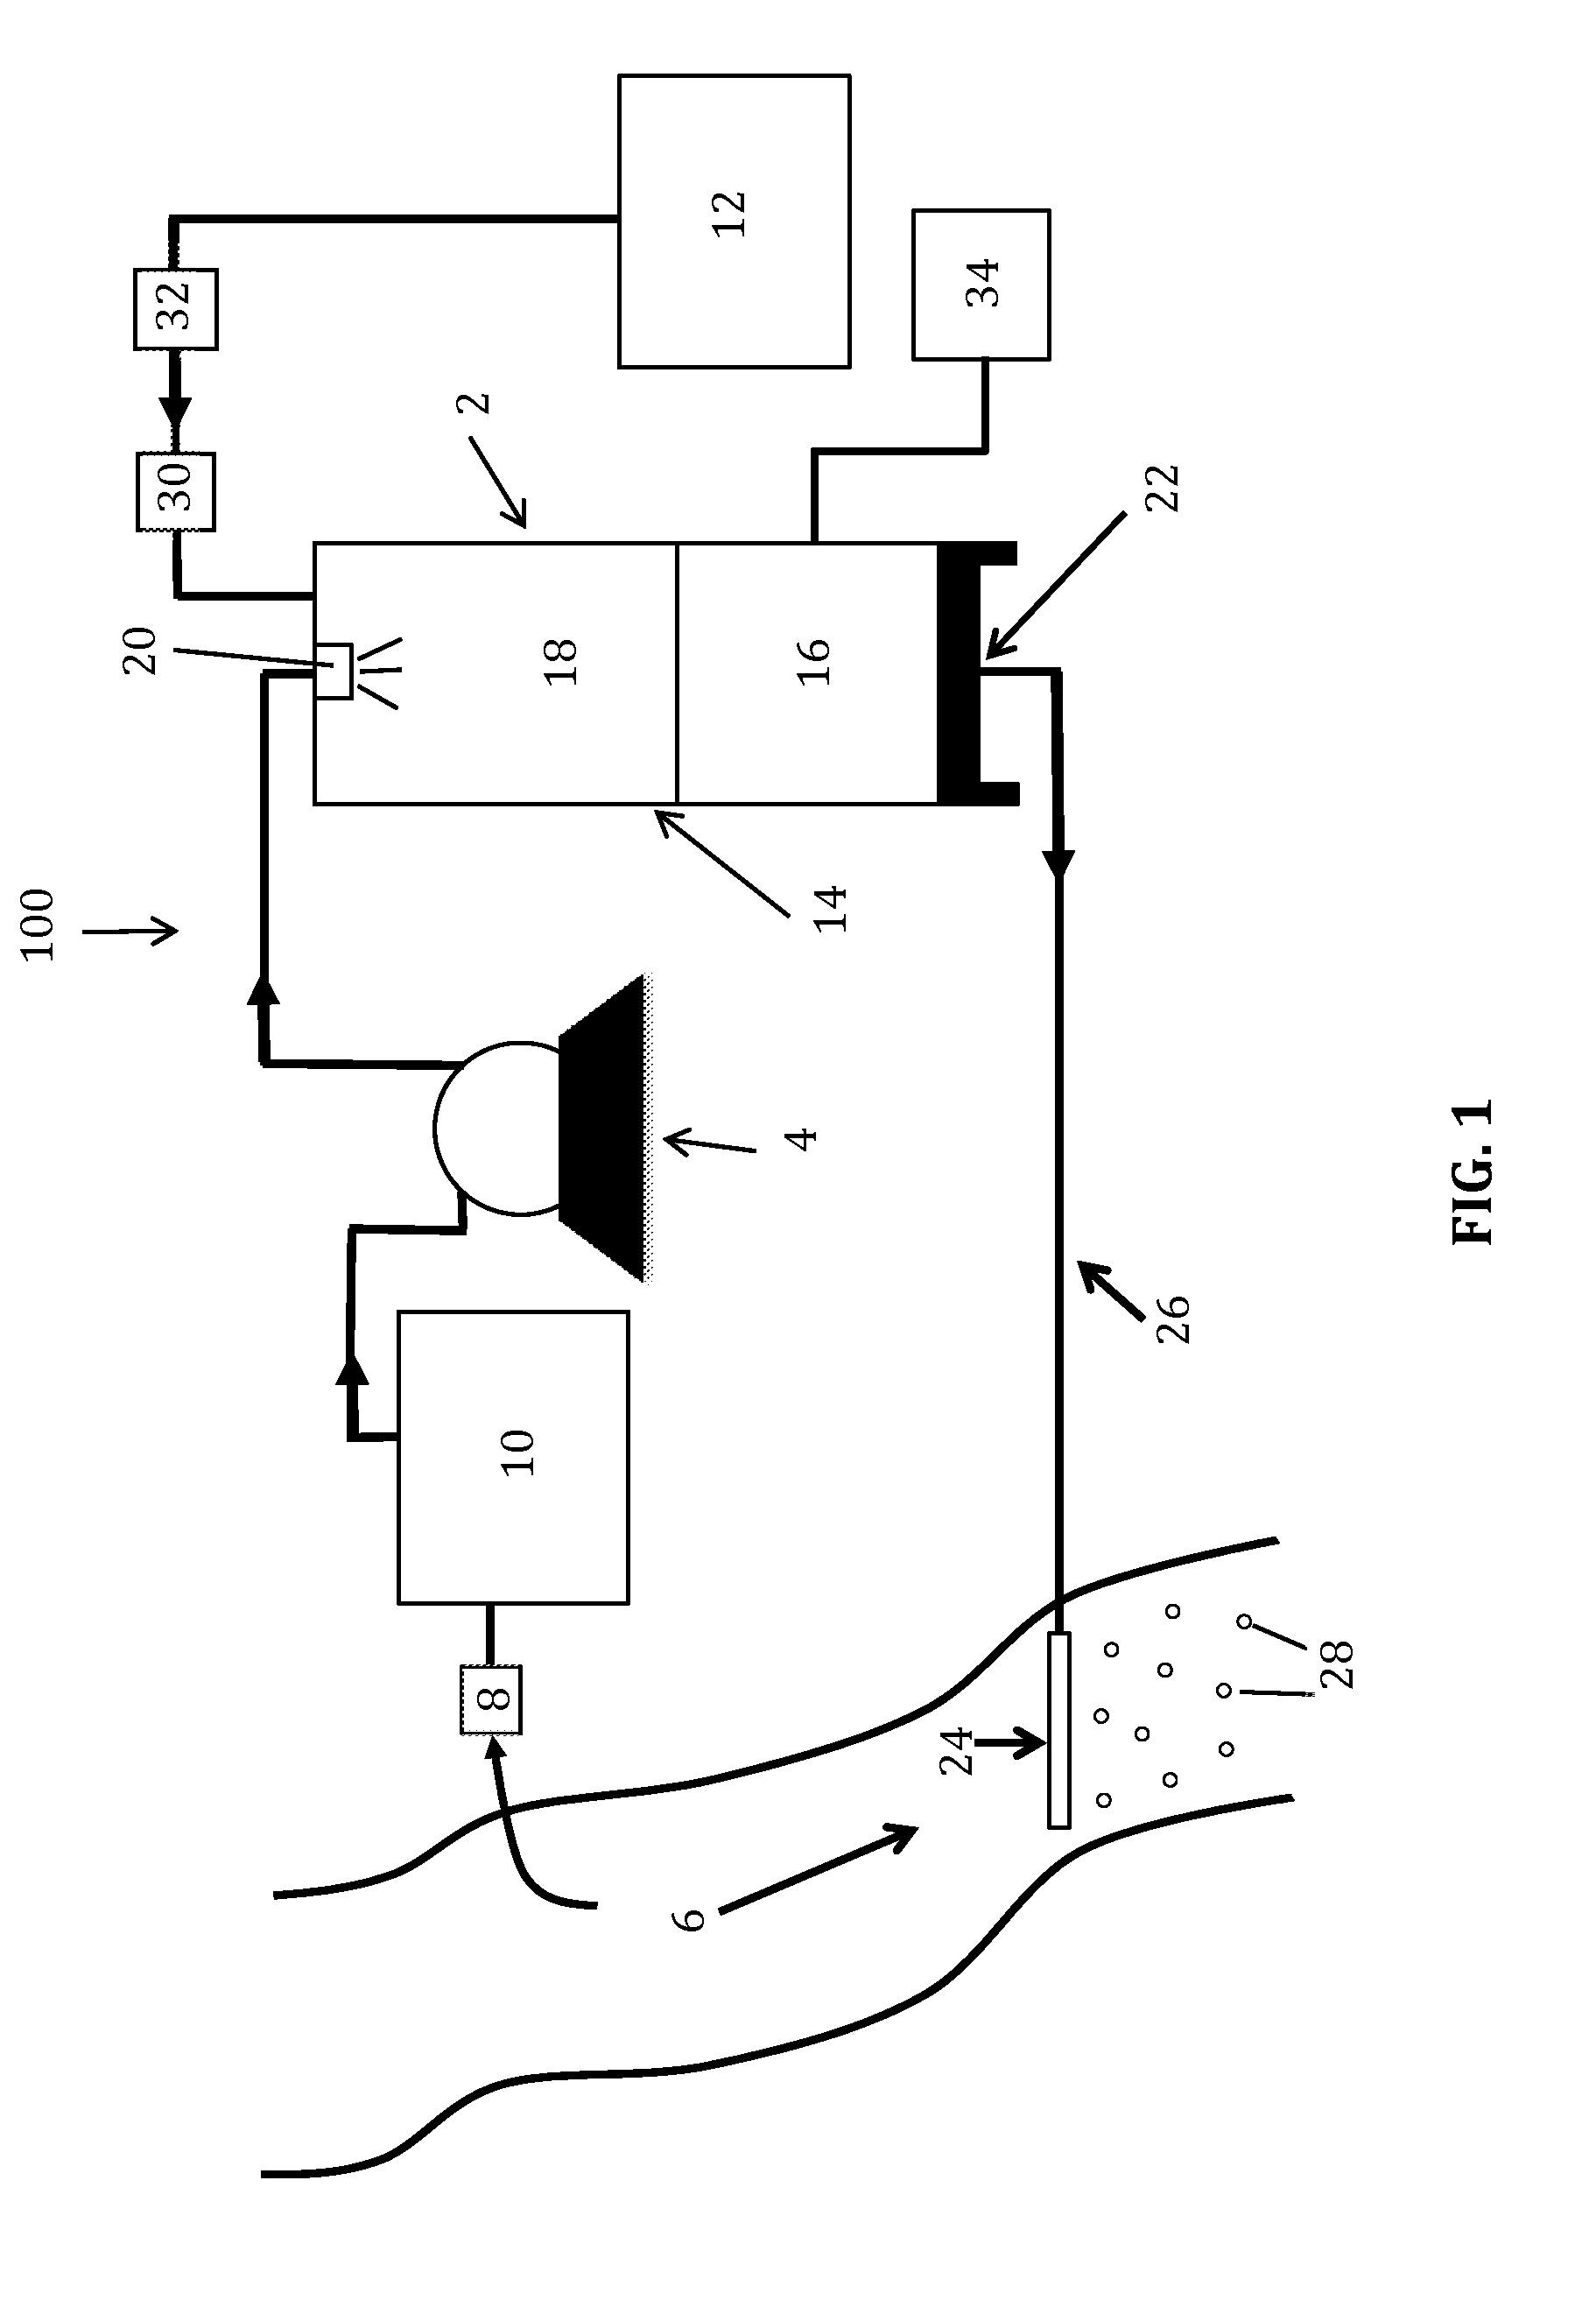 Systems and Methods for Maximizing Dissolved Gas Concentration of a Single Species of Gas from a Mixture of Multiple Gases